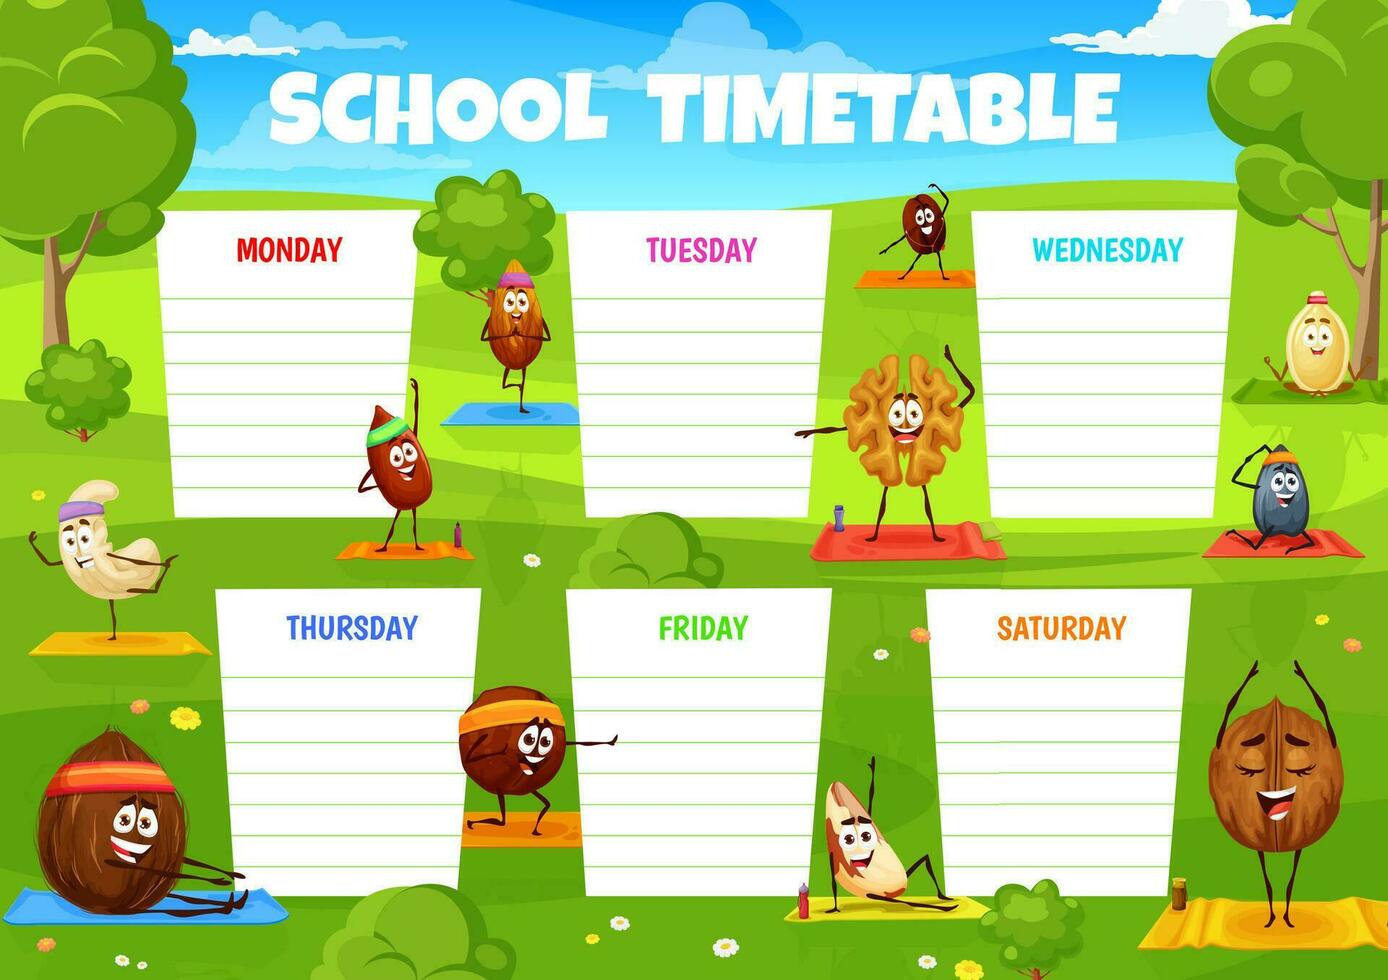 Education timetable schedule cartoon nuts on yoga vector